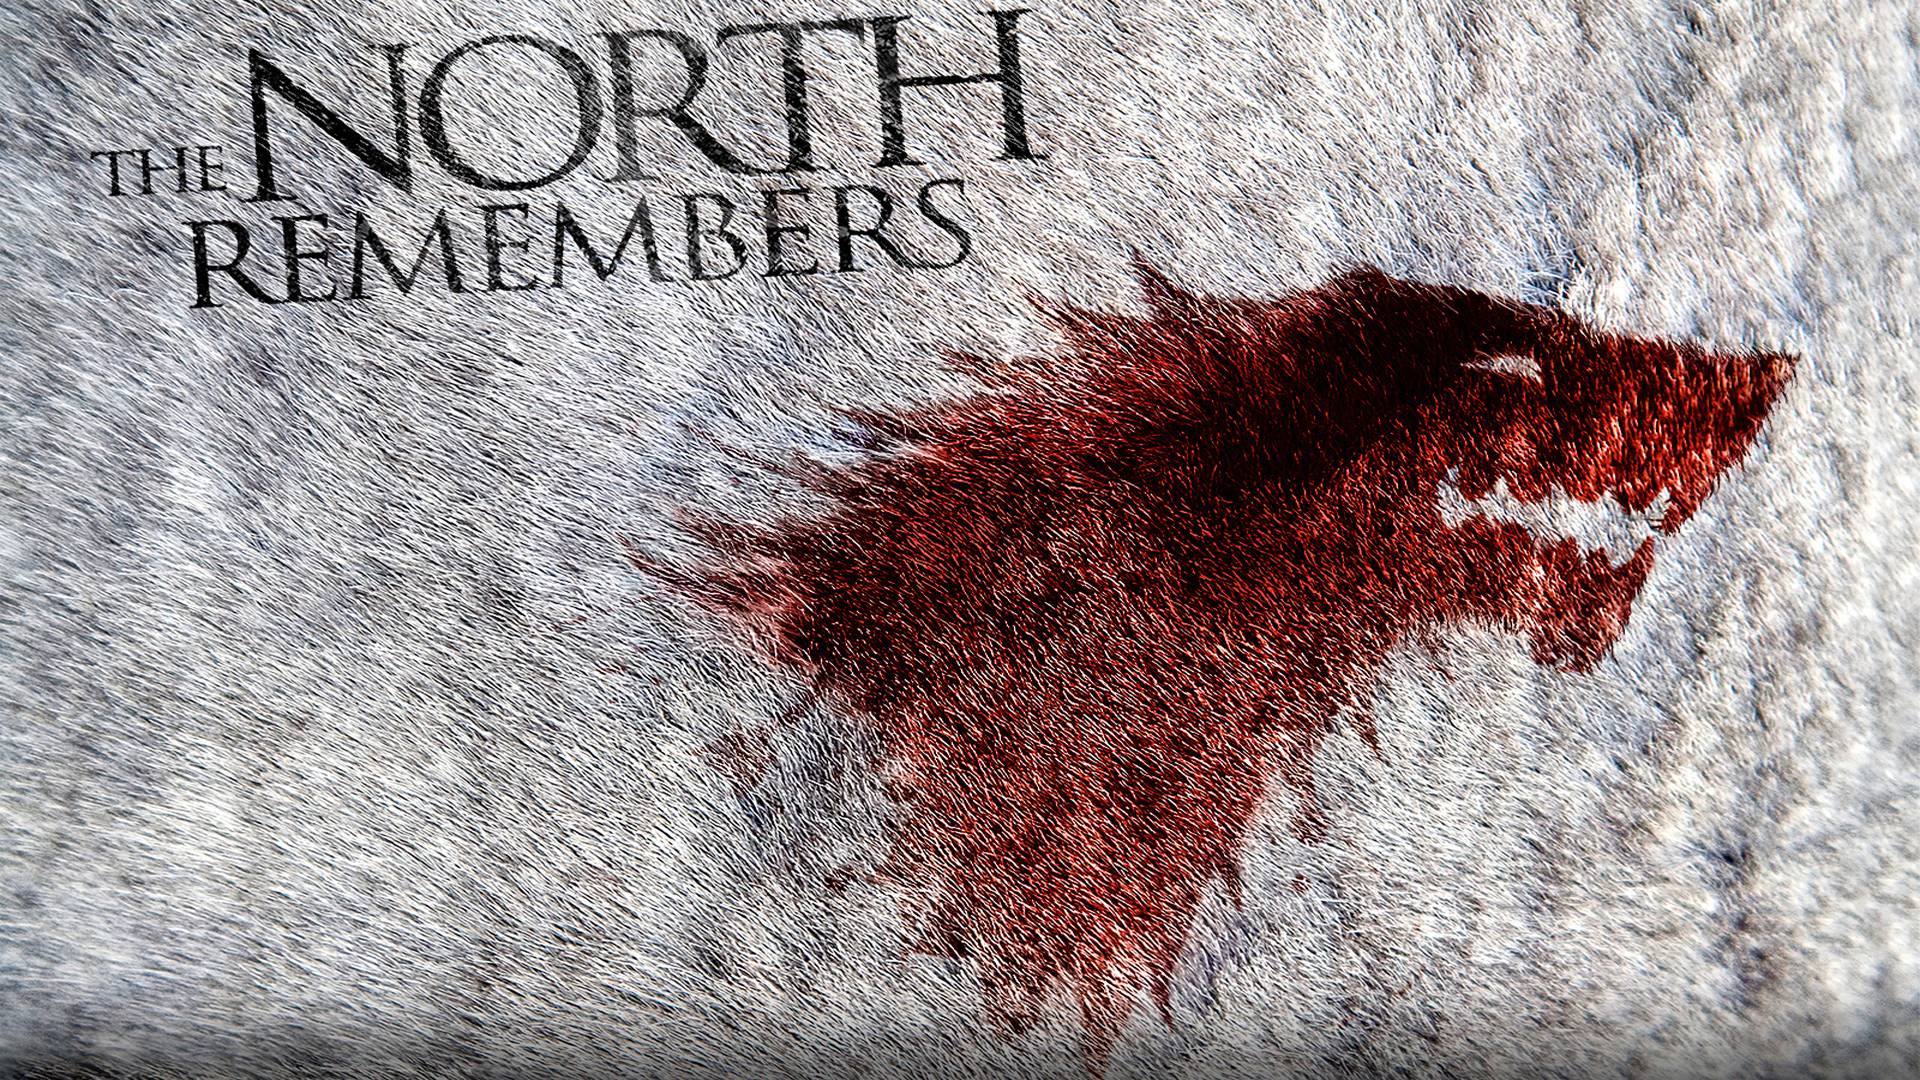 House Stark Wallpapers - Wallpaper Cave